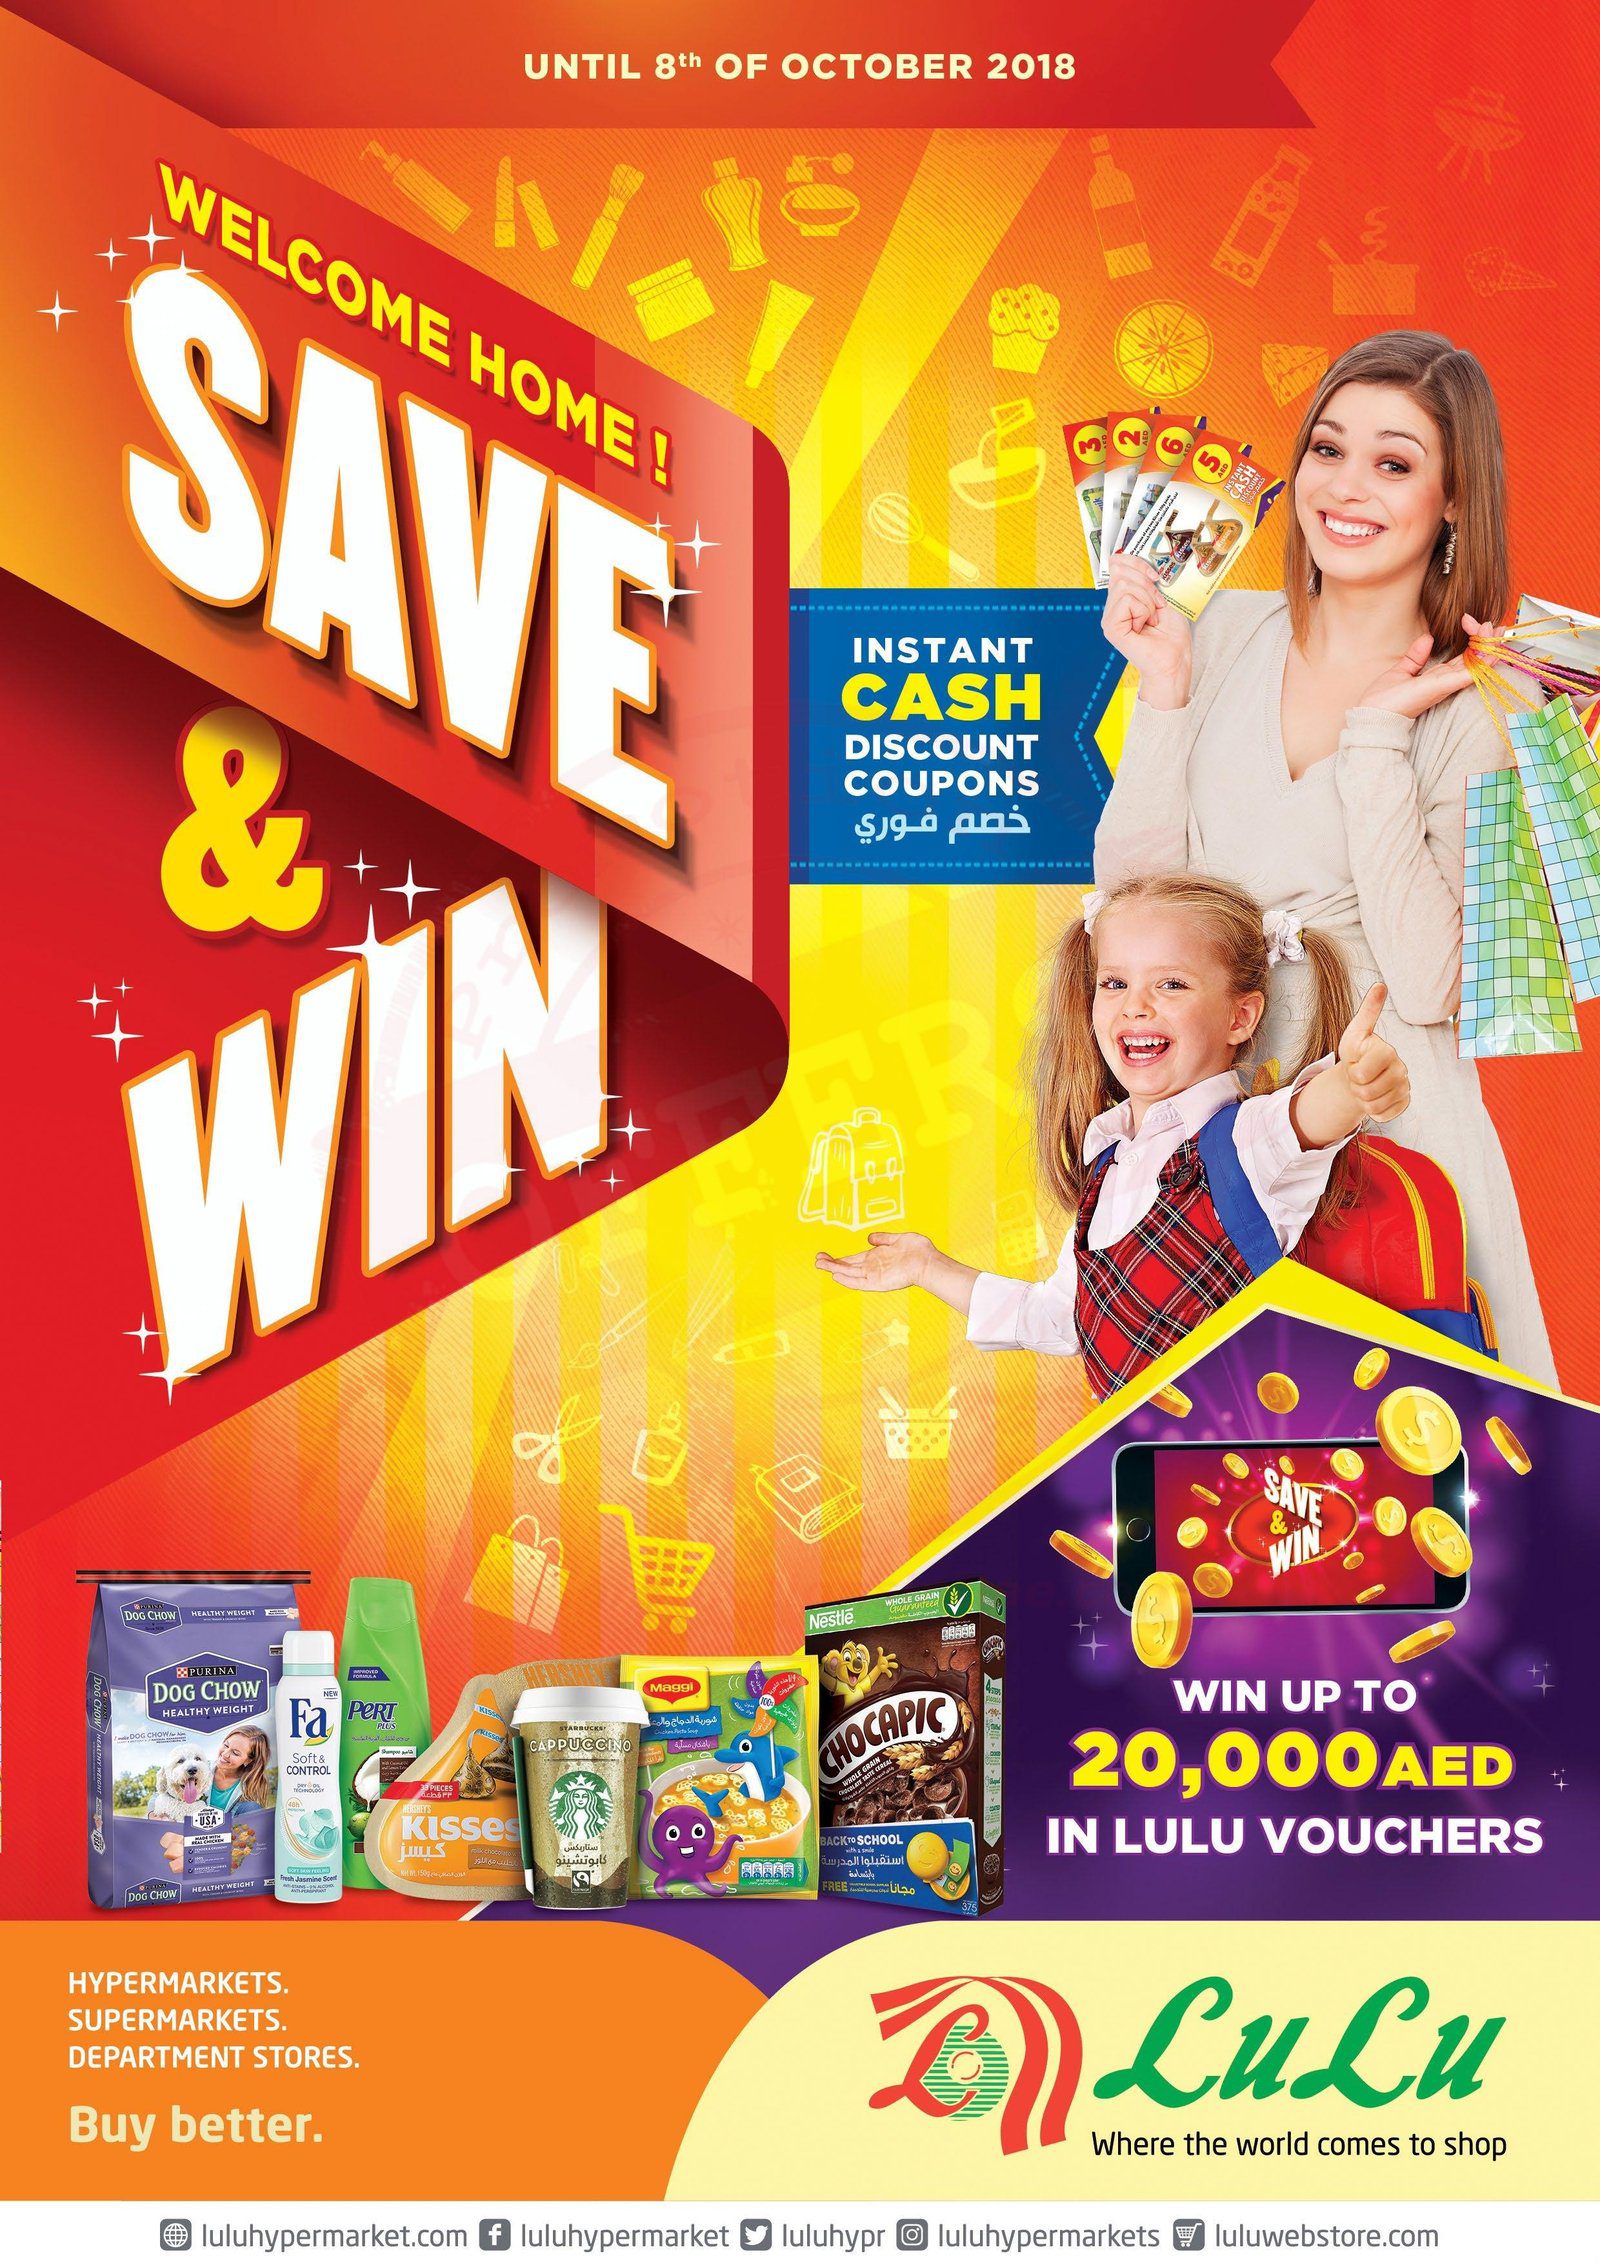 Lulu Save And Win Up To 20,000 AED